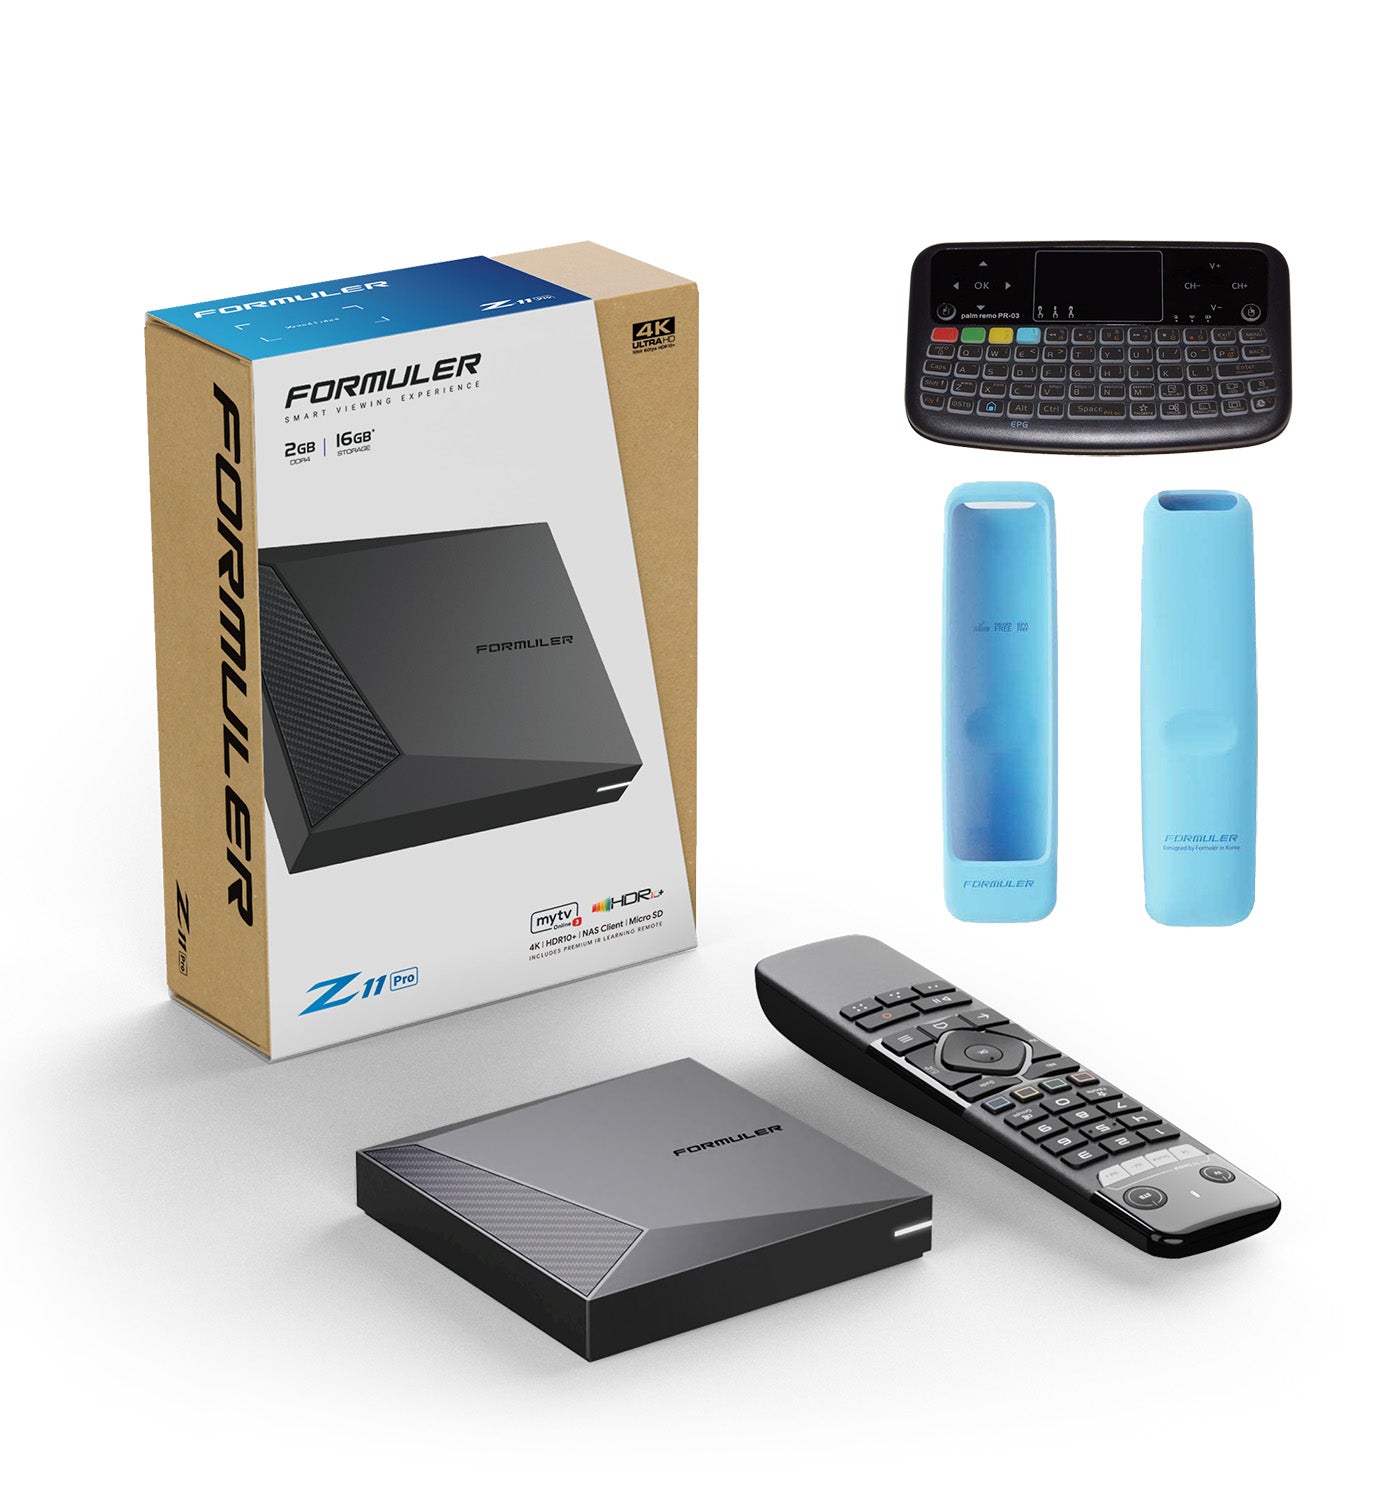 Formuler Z11 Pro + FREE ACCESSORY: 1x Blue Remote Cover + 1x Keyboard